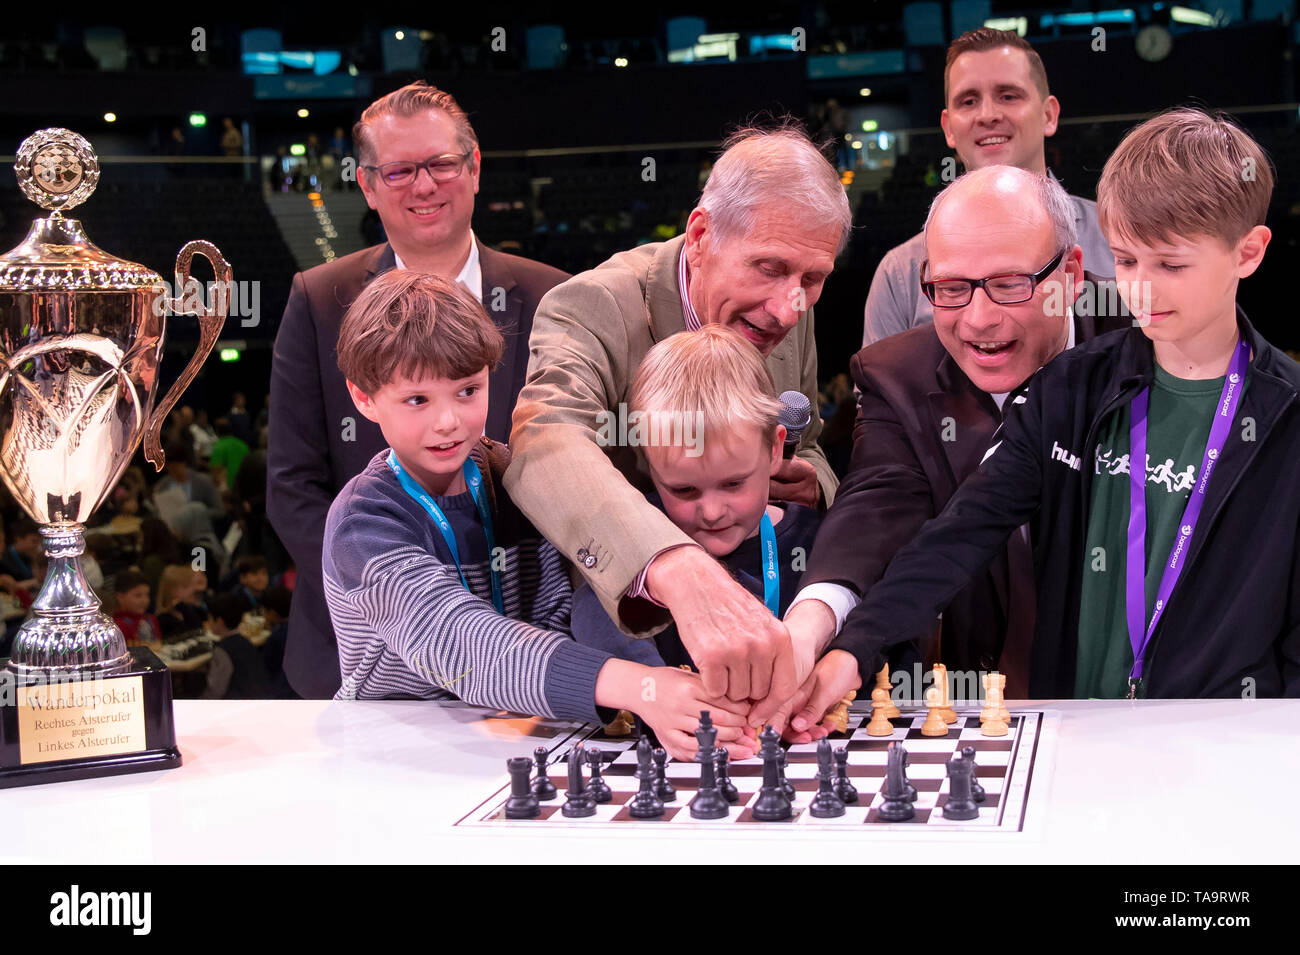 23 May 2019, Hamburg: School senator Thies Rabe (2nd from right, SPD) and ex-day topic moderator Ulrich Wickert (4th from left), together with the pupils Fridjef Hauschild (l-r), Schule in der Alten Forst, Jari Dieckmann, Schule in der Alten Forst, and Thome Teßmann, Schule Genslerstraße, make the opening move of the tournament. In the background are Arndt Franzen (l), Chief Commercial Officer Barclaycard, and Thomas Peters (3rd from right), moderator of the tournament. Around 4000 pupils take part in the 61st edition of the tournament. According to the organizer, it is the world's largest che Stock Photo